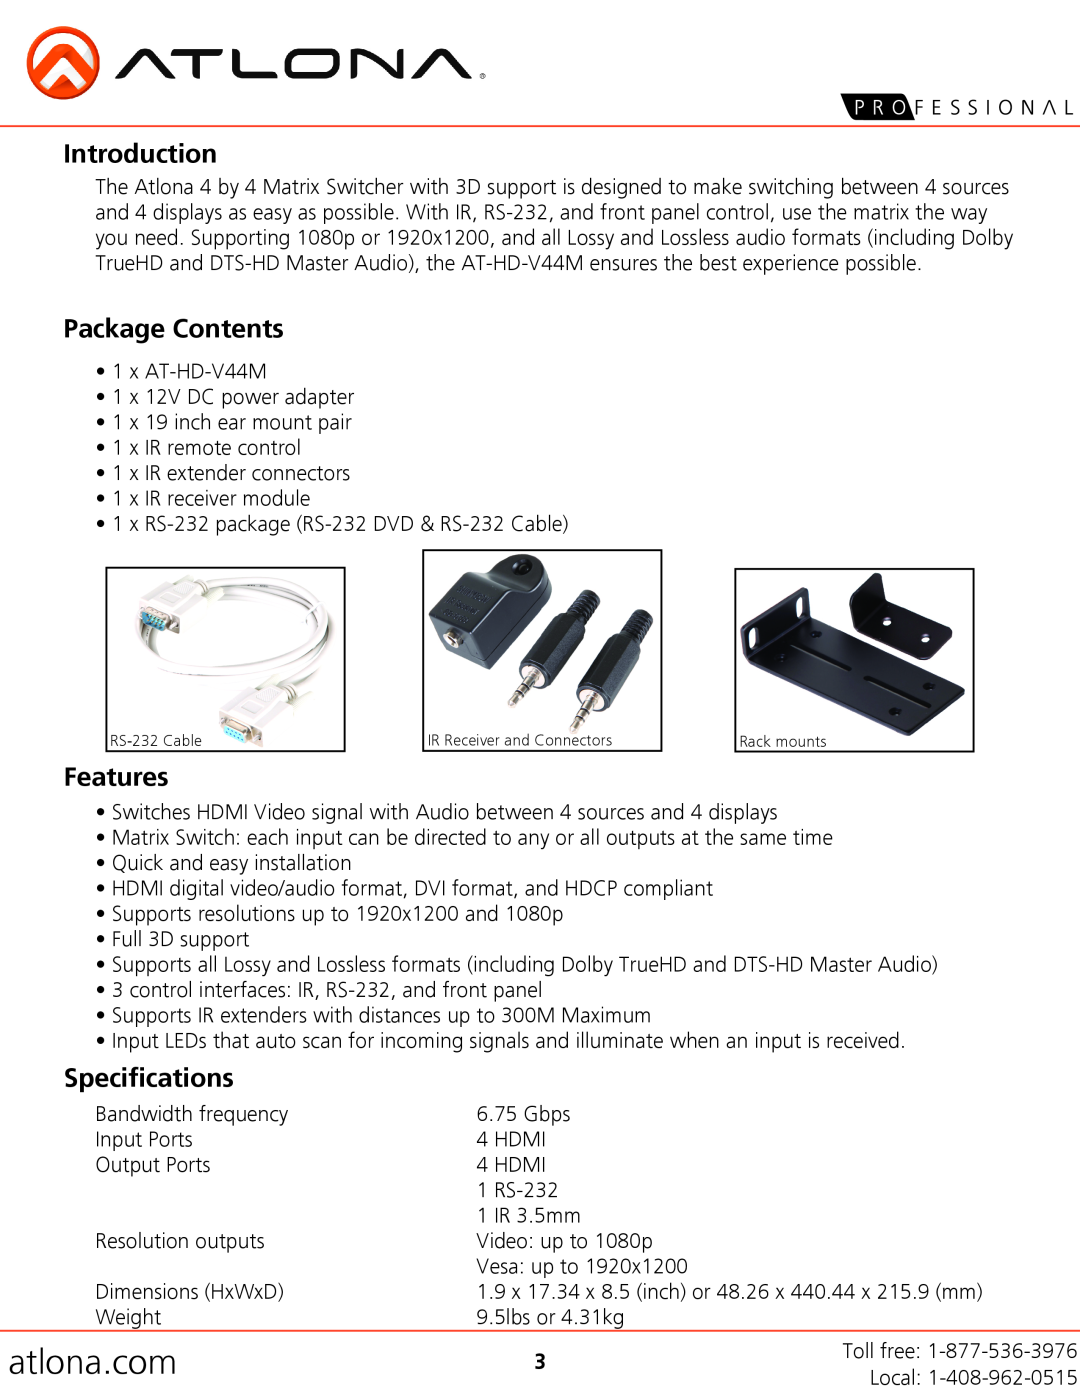 Atlona AT-HD-V44M user manual Introduction, Package Contents, Features, Specifications, atlona.com 